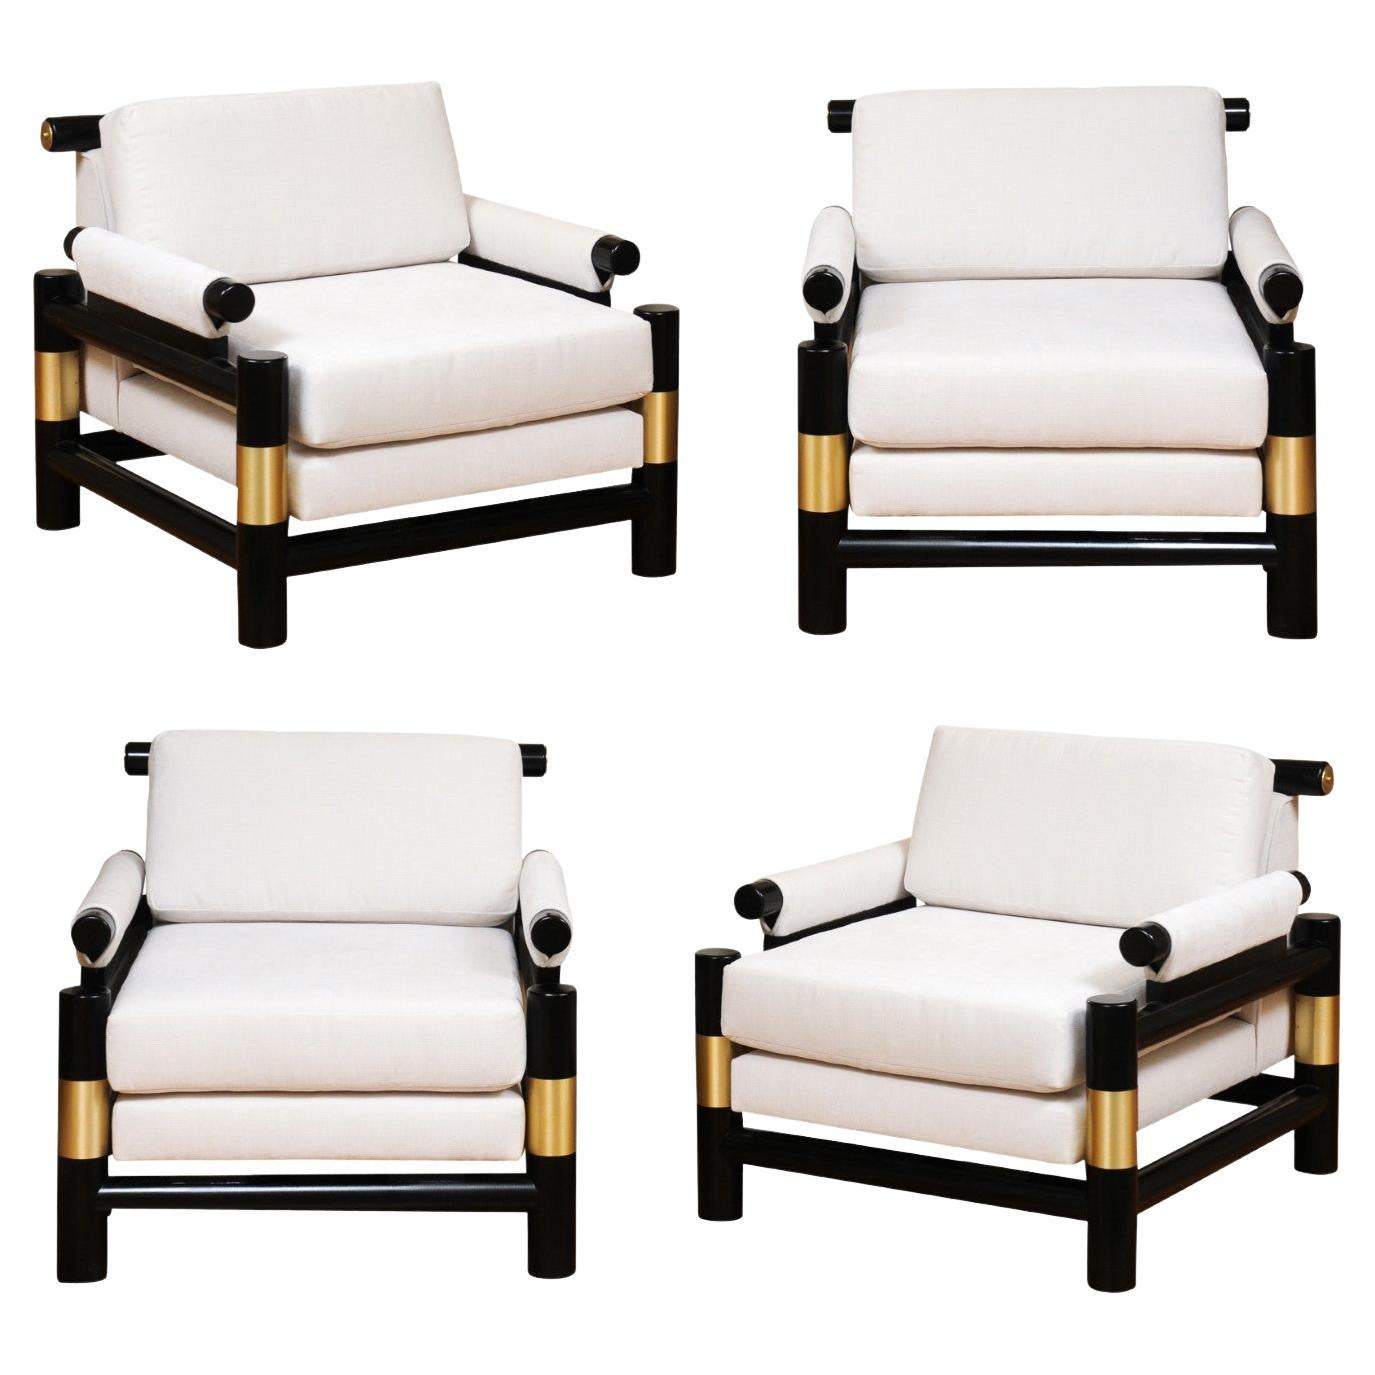 Breathtaking Set of 4 Modern Floating Pagoda Club Chairs by Baker, circa 1980